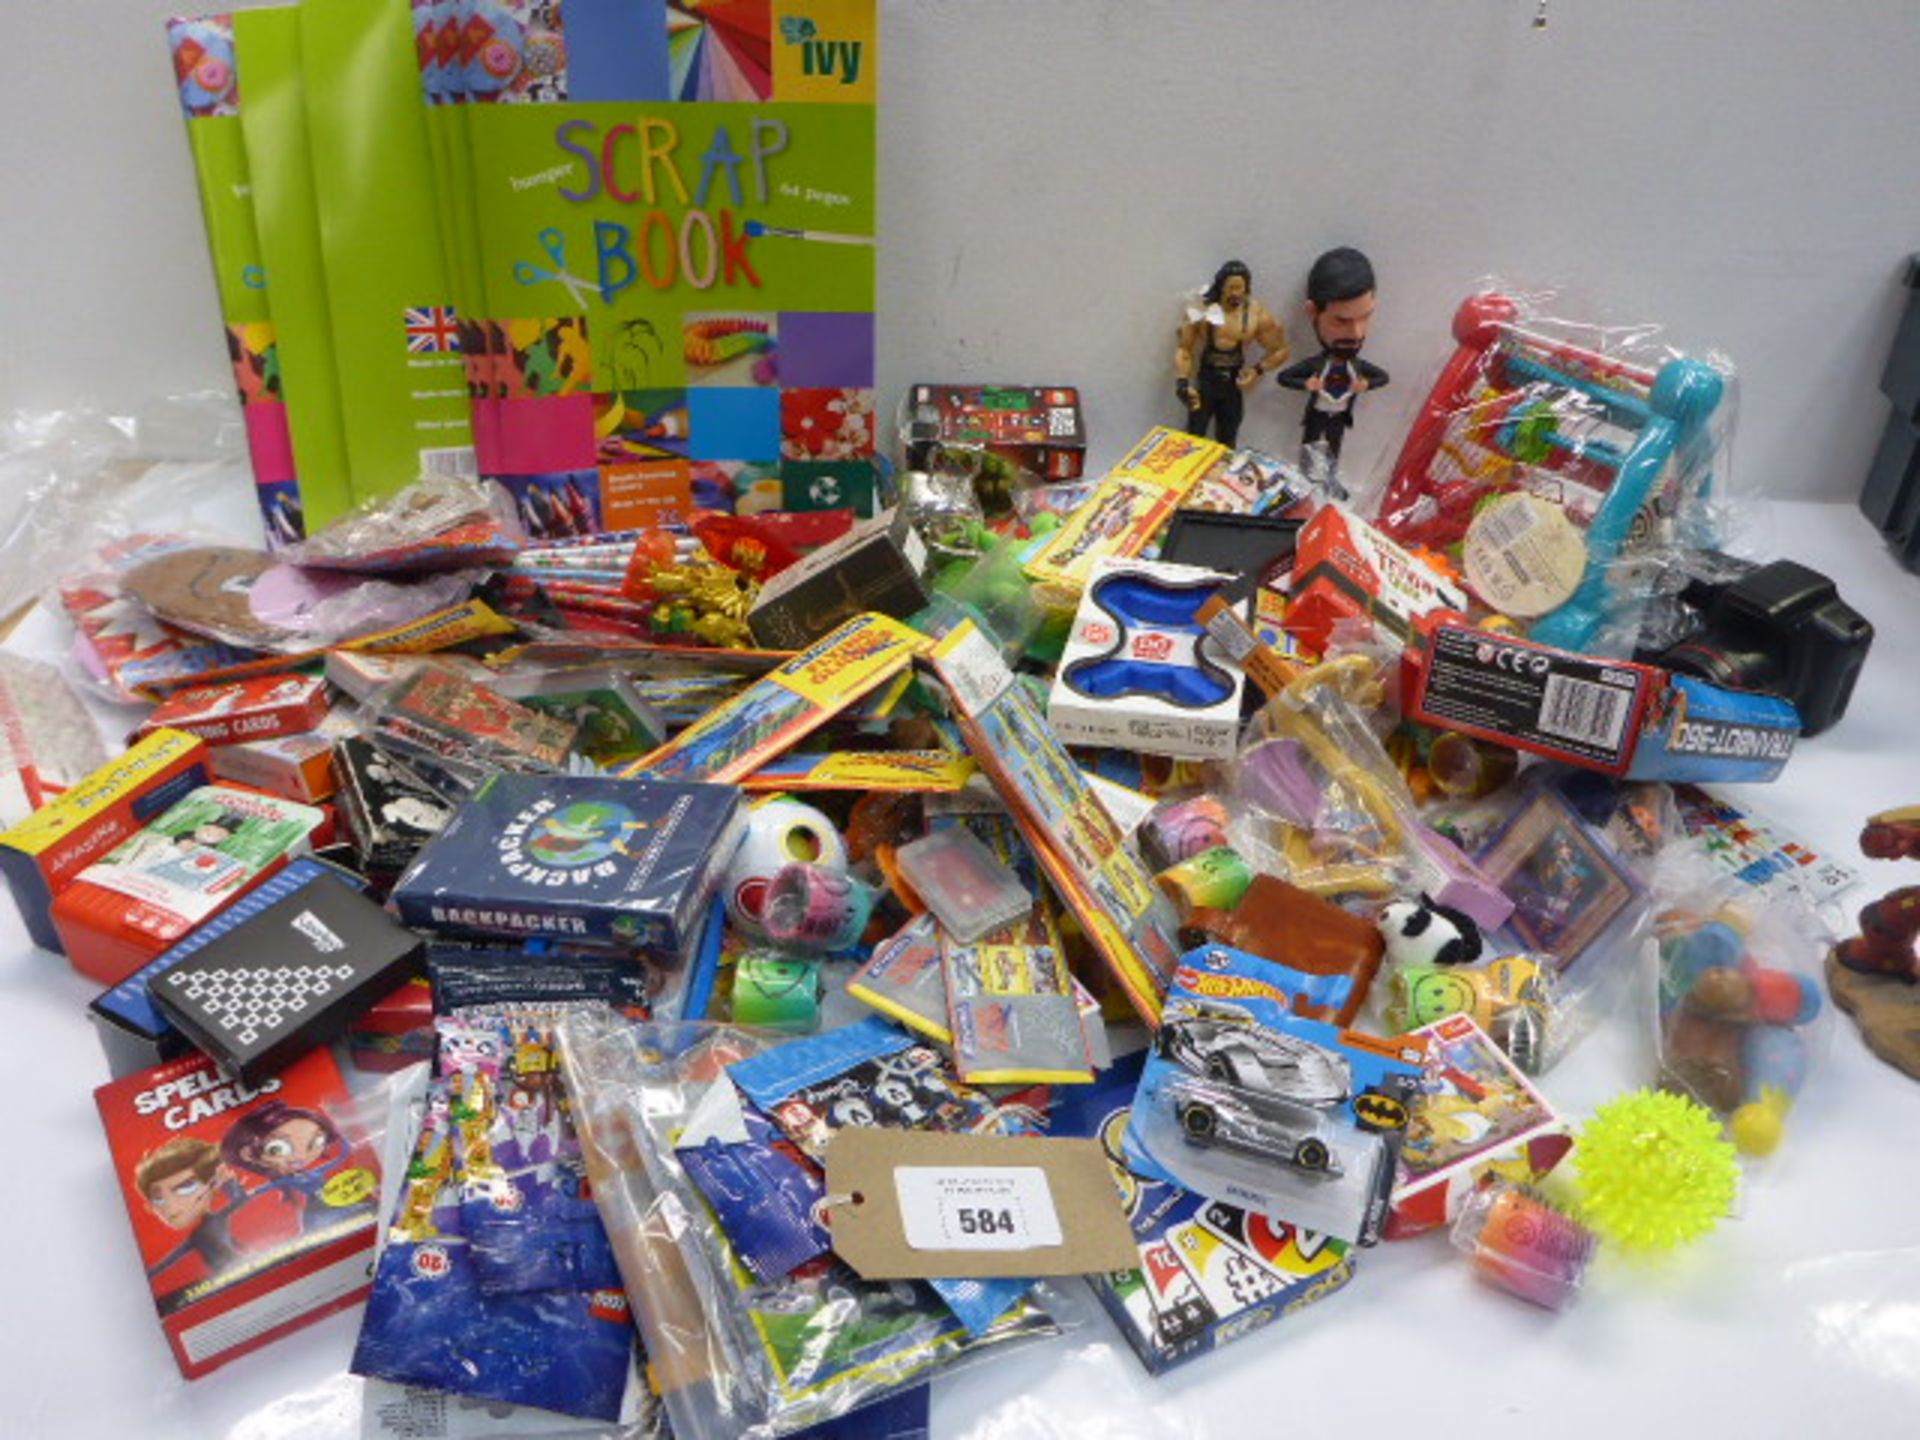 Large bag of novelty toys, Lego miniatures, scrap books, action figures, card games, gliders etc